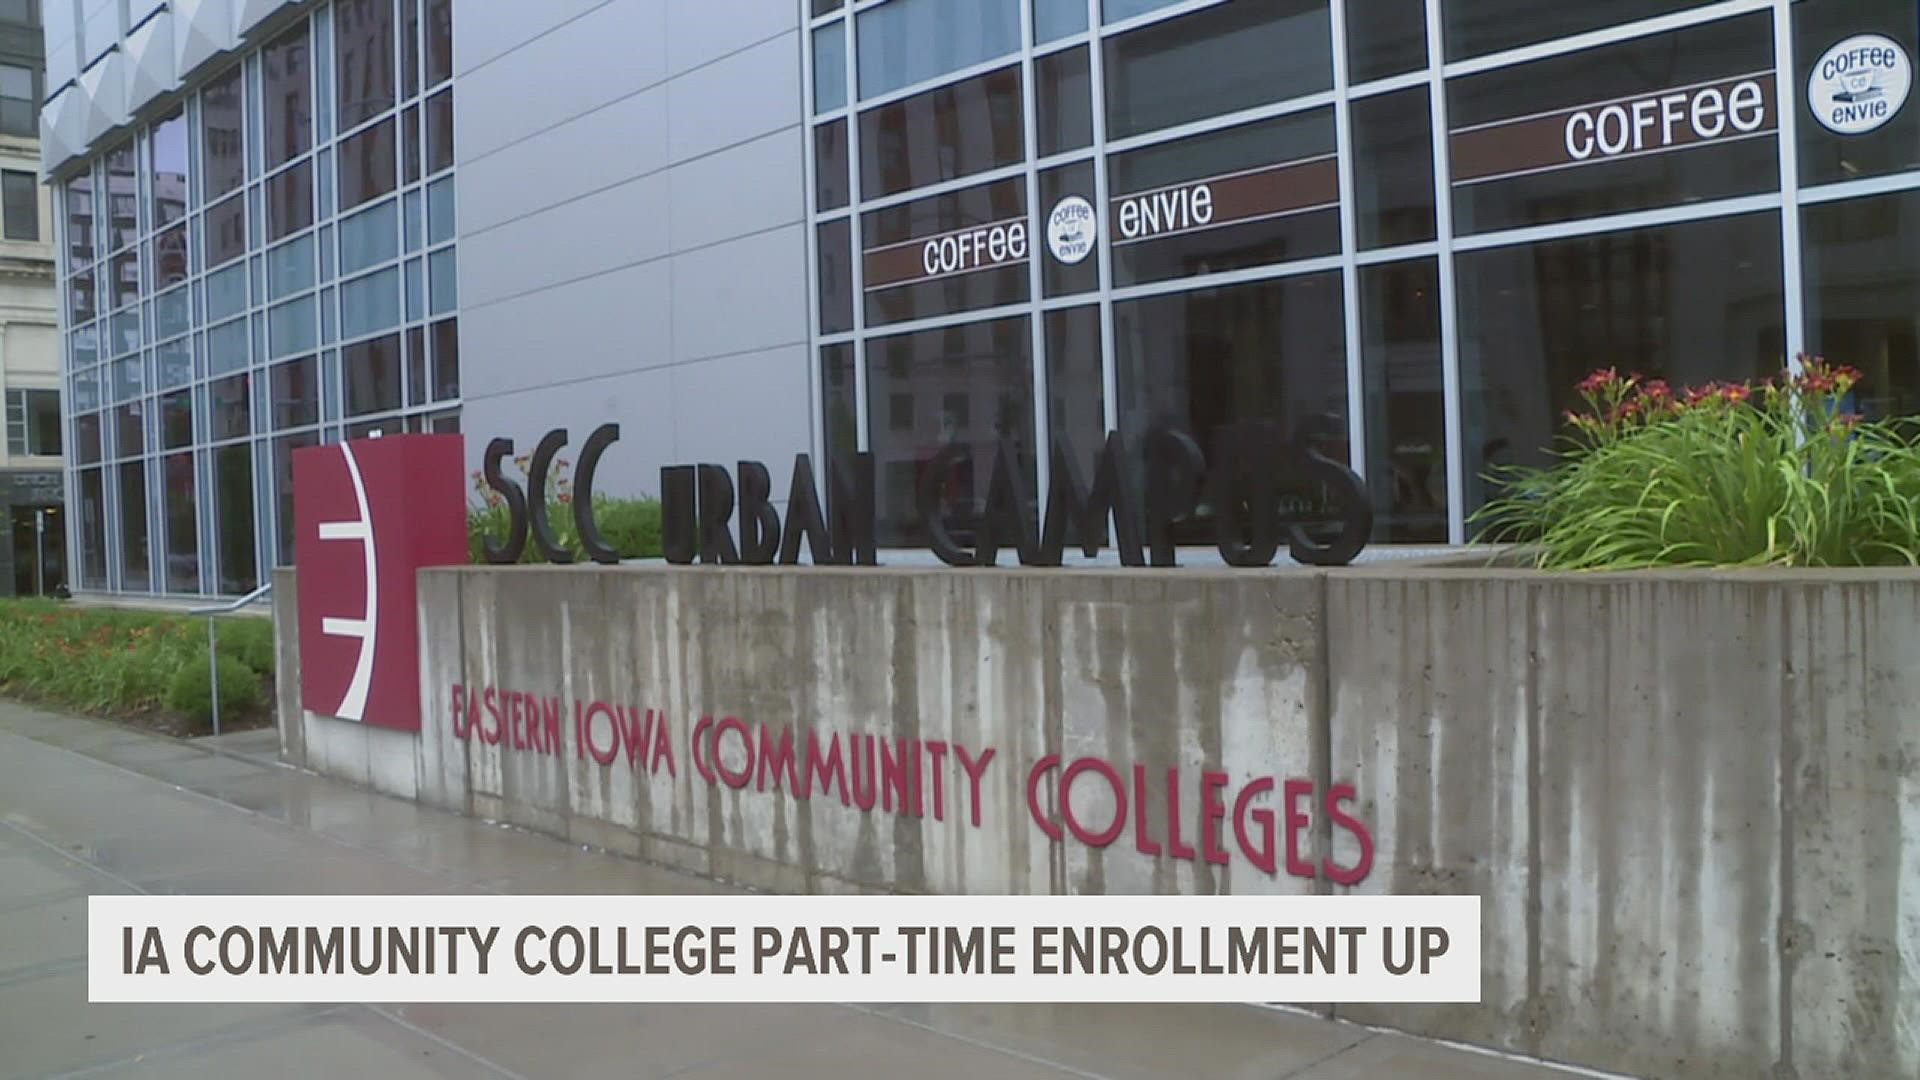 More students are choosing part-time study at Iowa community colleges, making up 66% of the total student body.